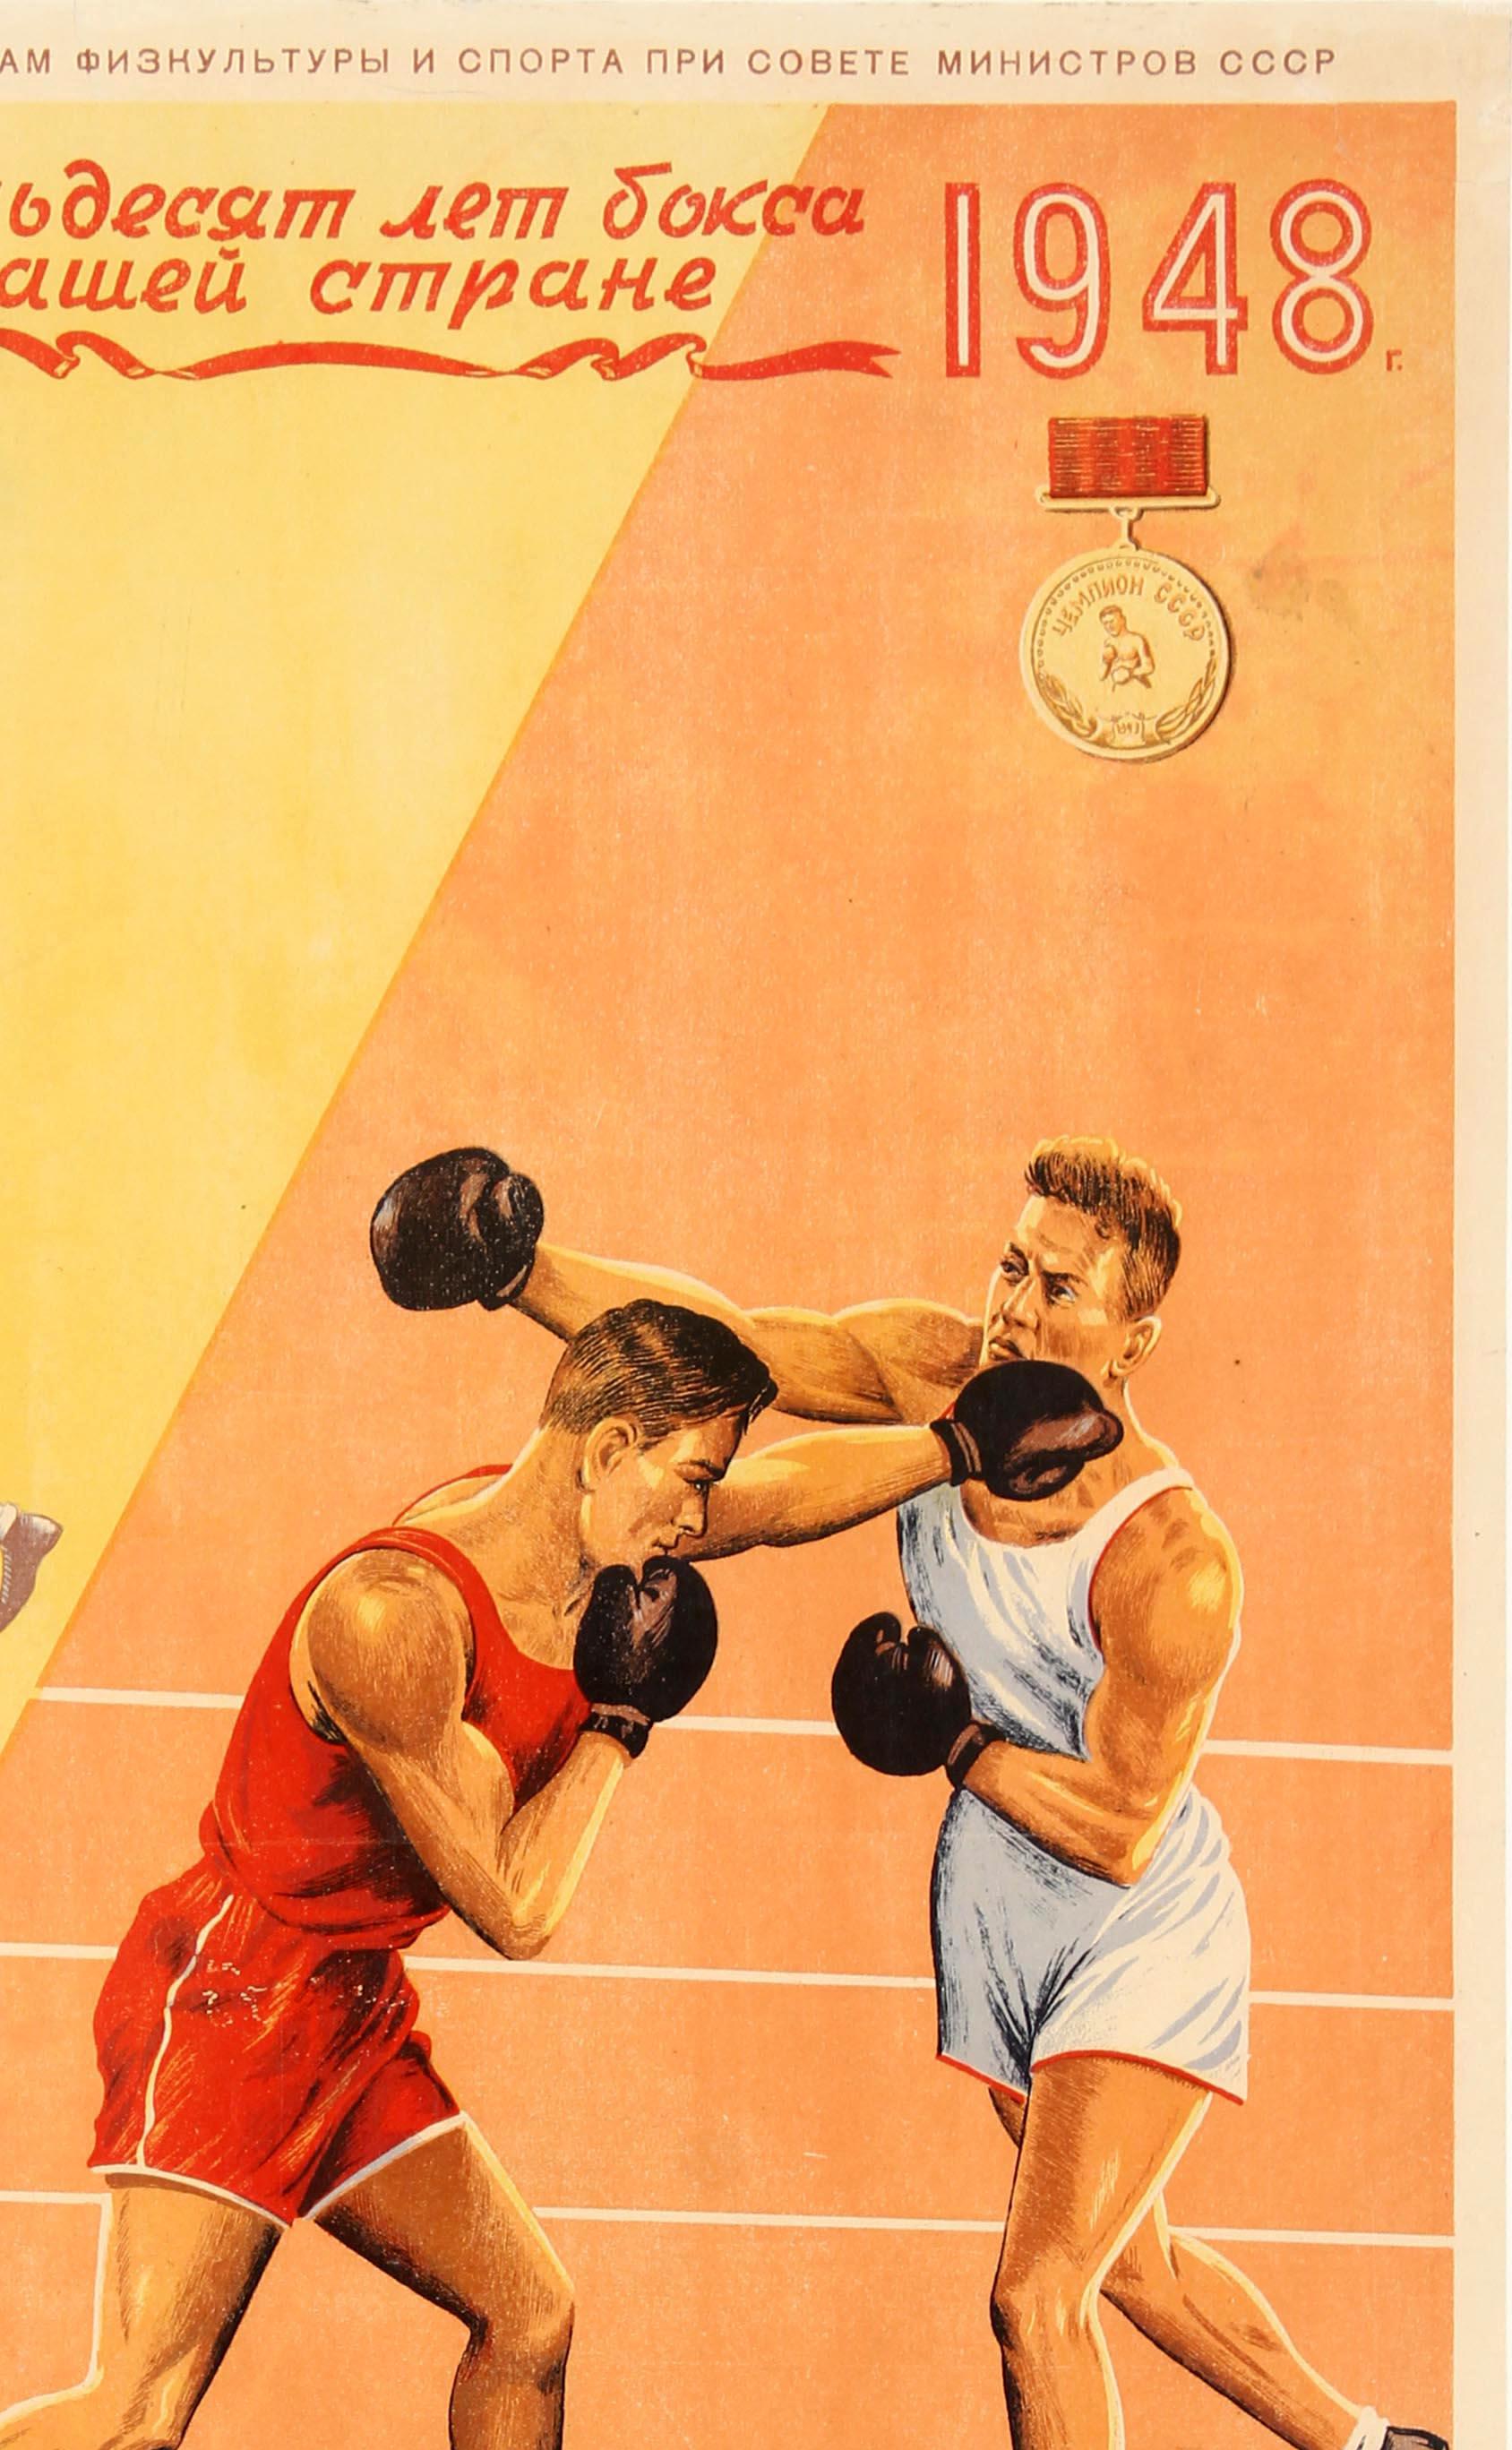 Original vintage Soviet sport poster promoting 50 Years of Boxing in Russia 1898 1948 The Sport of Courage and Strength published by the USSR ministry of physical culture and sport. Great illustration depicting two boxing scenes, one of a boxing